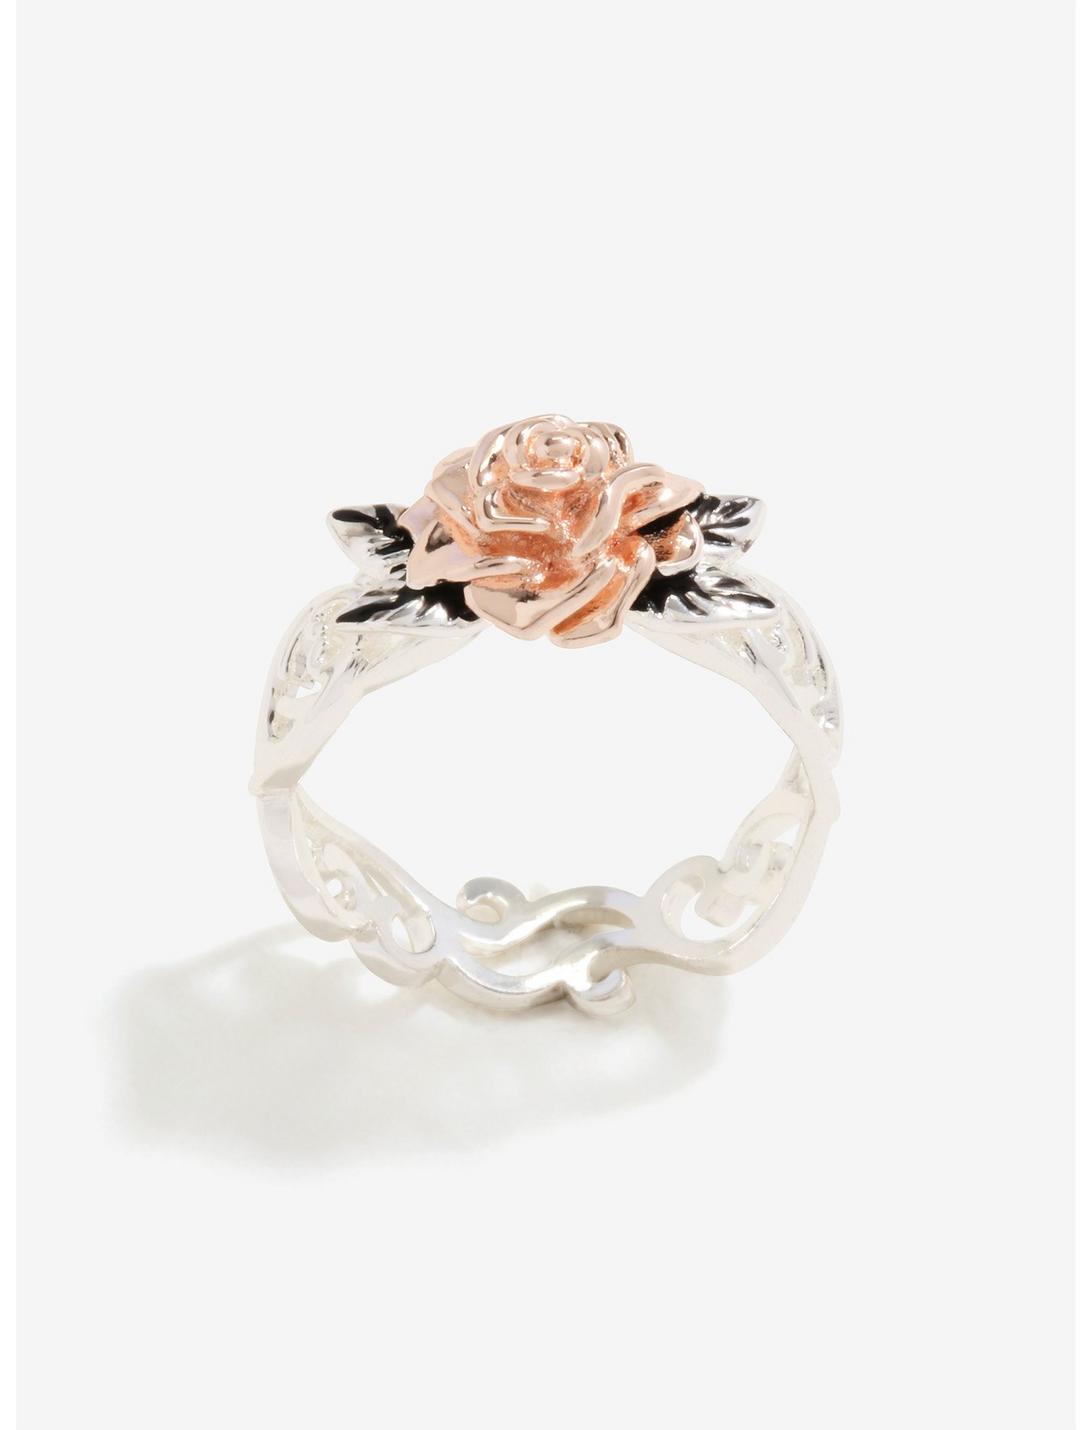 Rose gold beauty and the beast ring sn74141n